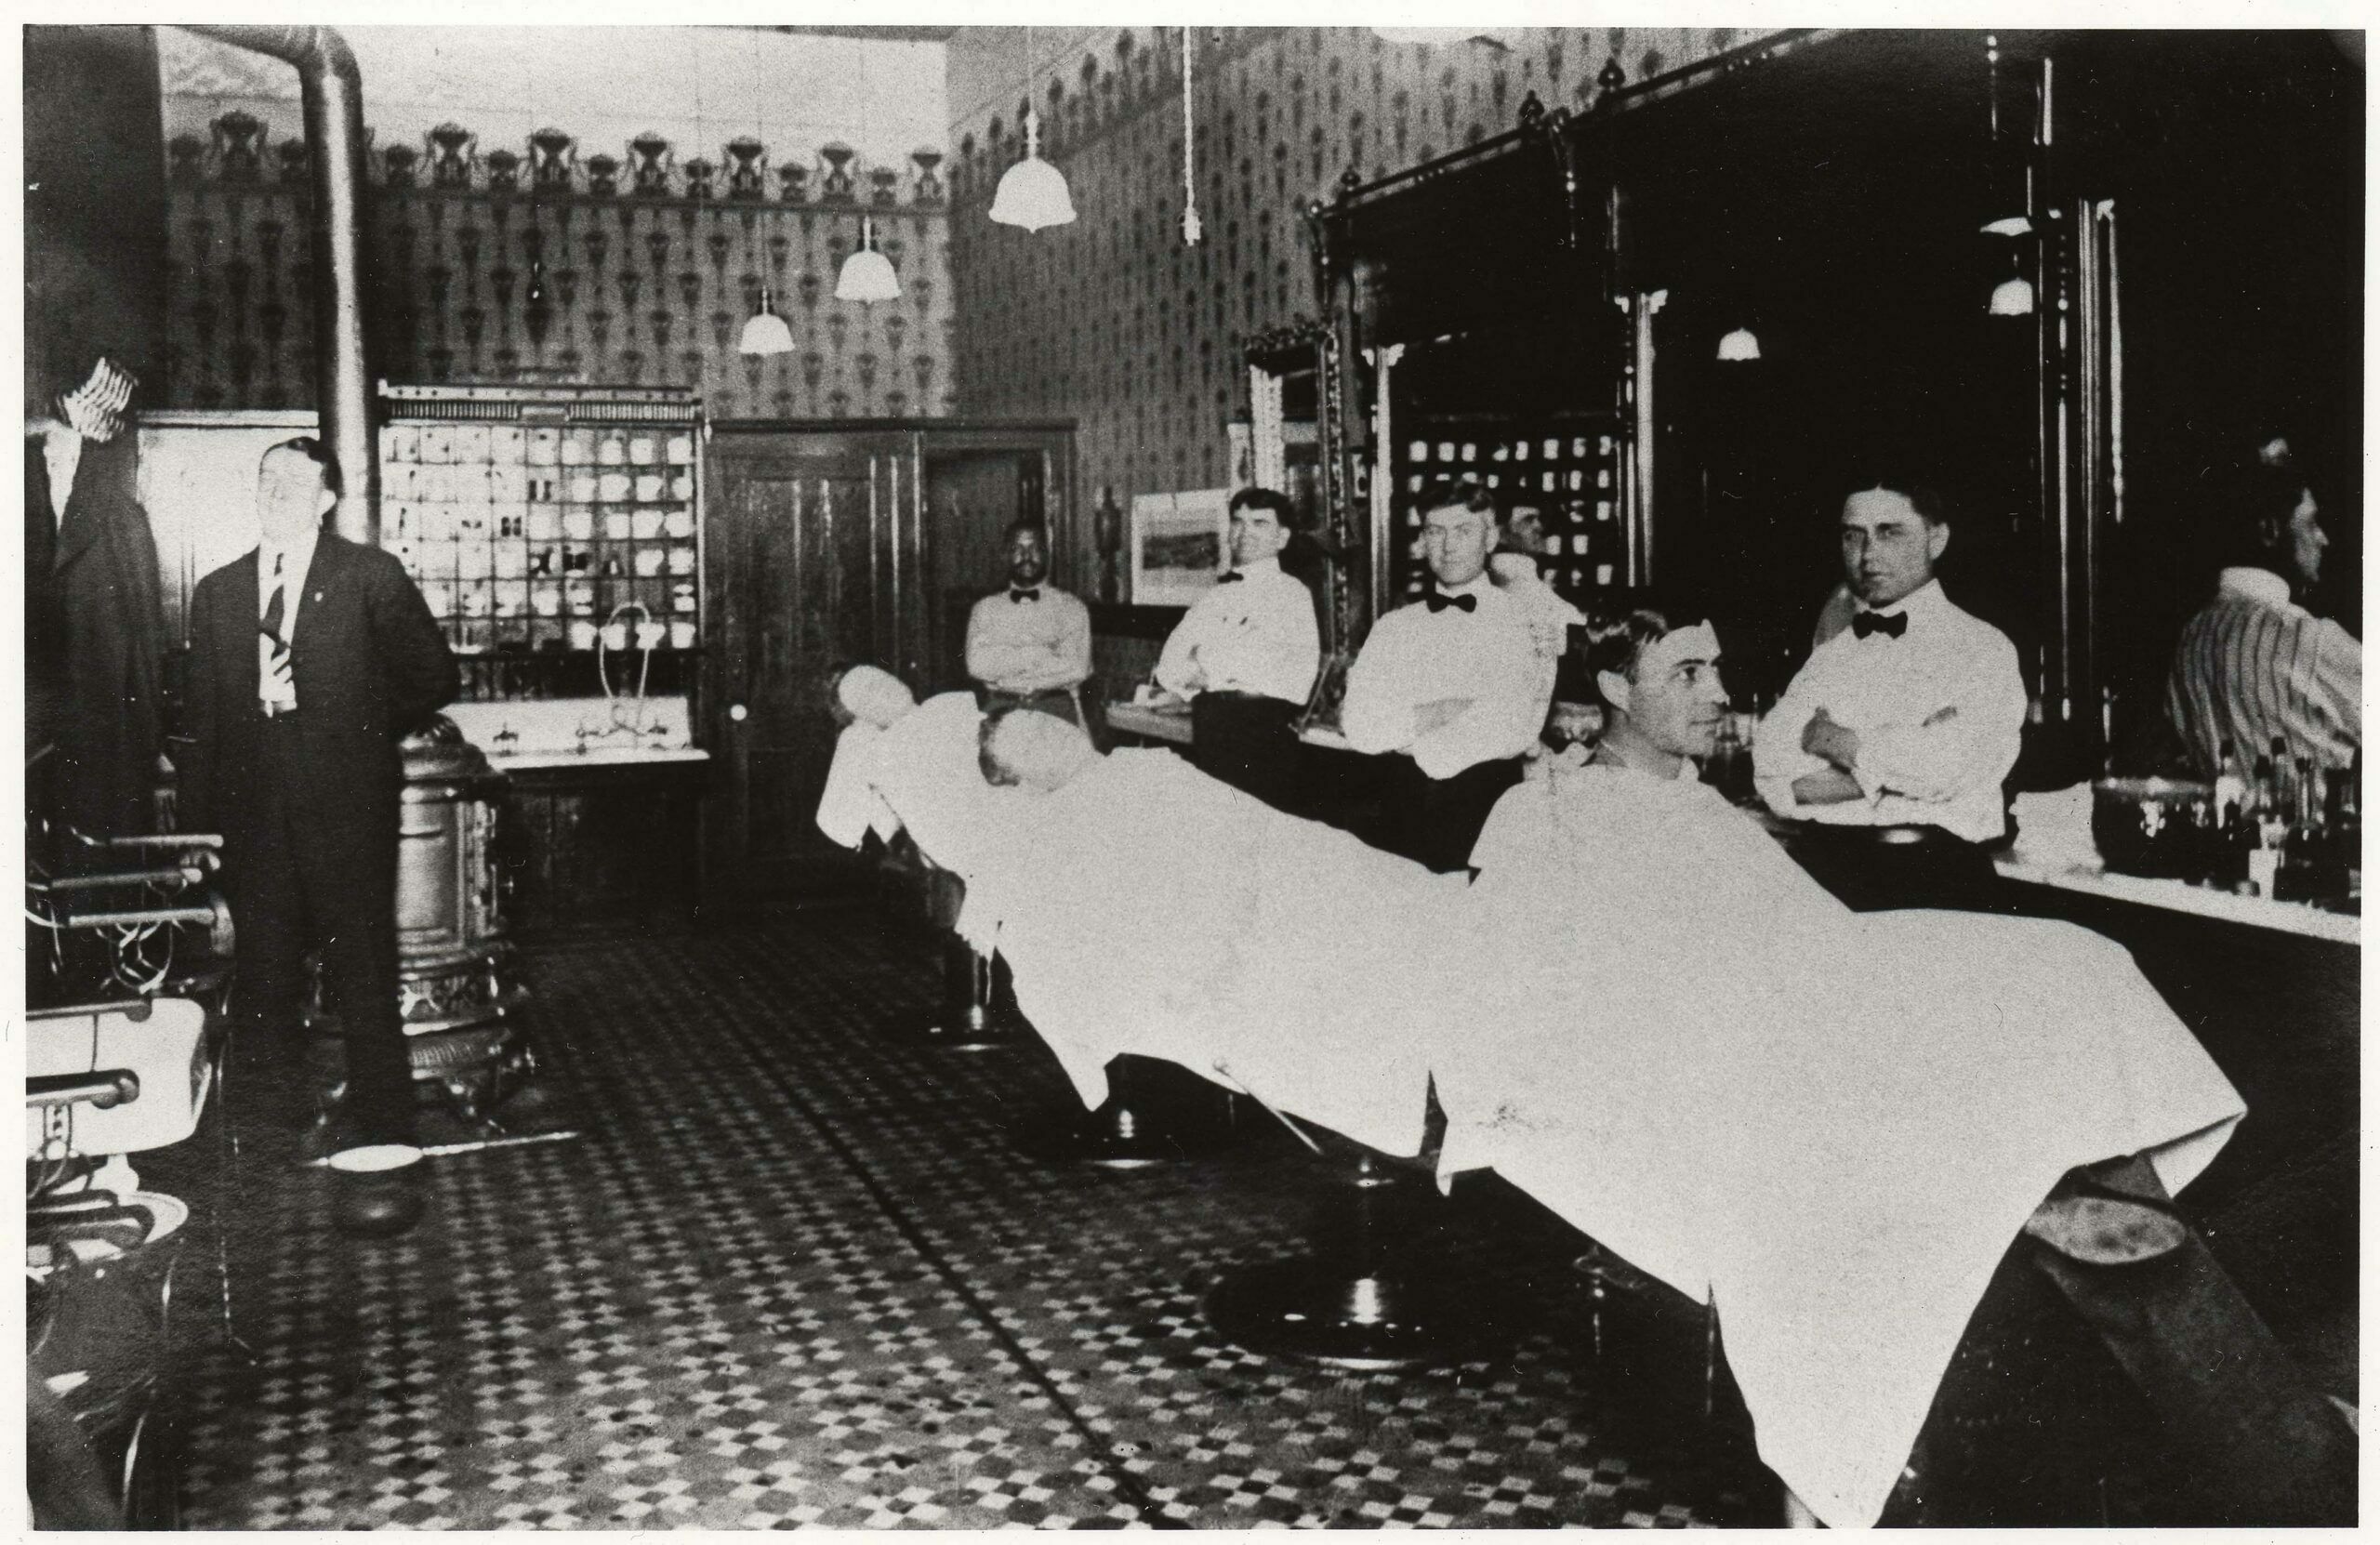 Despite a schedule that included overseeing construction of the big Ohio and Colorado smokestack in 1917, getting married, and being promoted to superintendent at the smelter, Arthur Theodore Thomson (in the chair at the right) took time for a shave and a haircut at Manful’s Barbershop at 109 F Street in Salida.  (1)